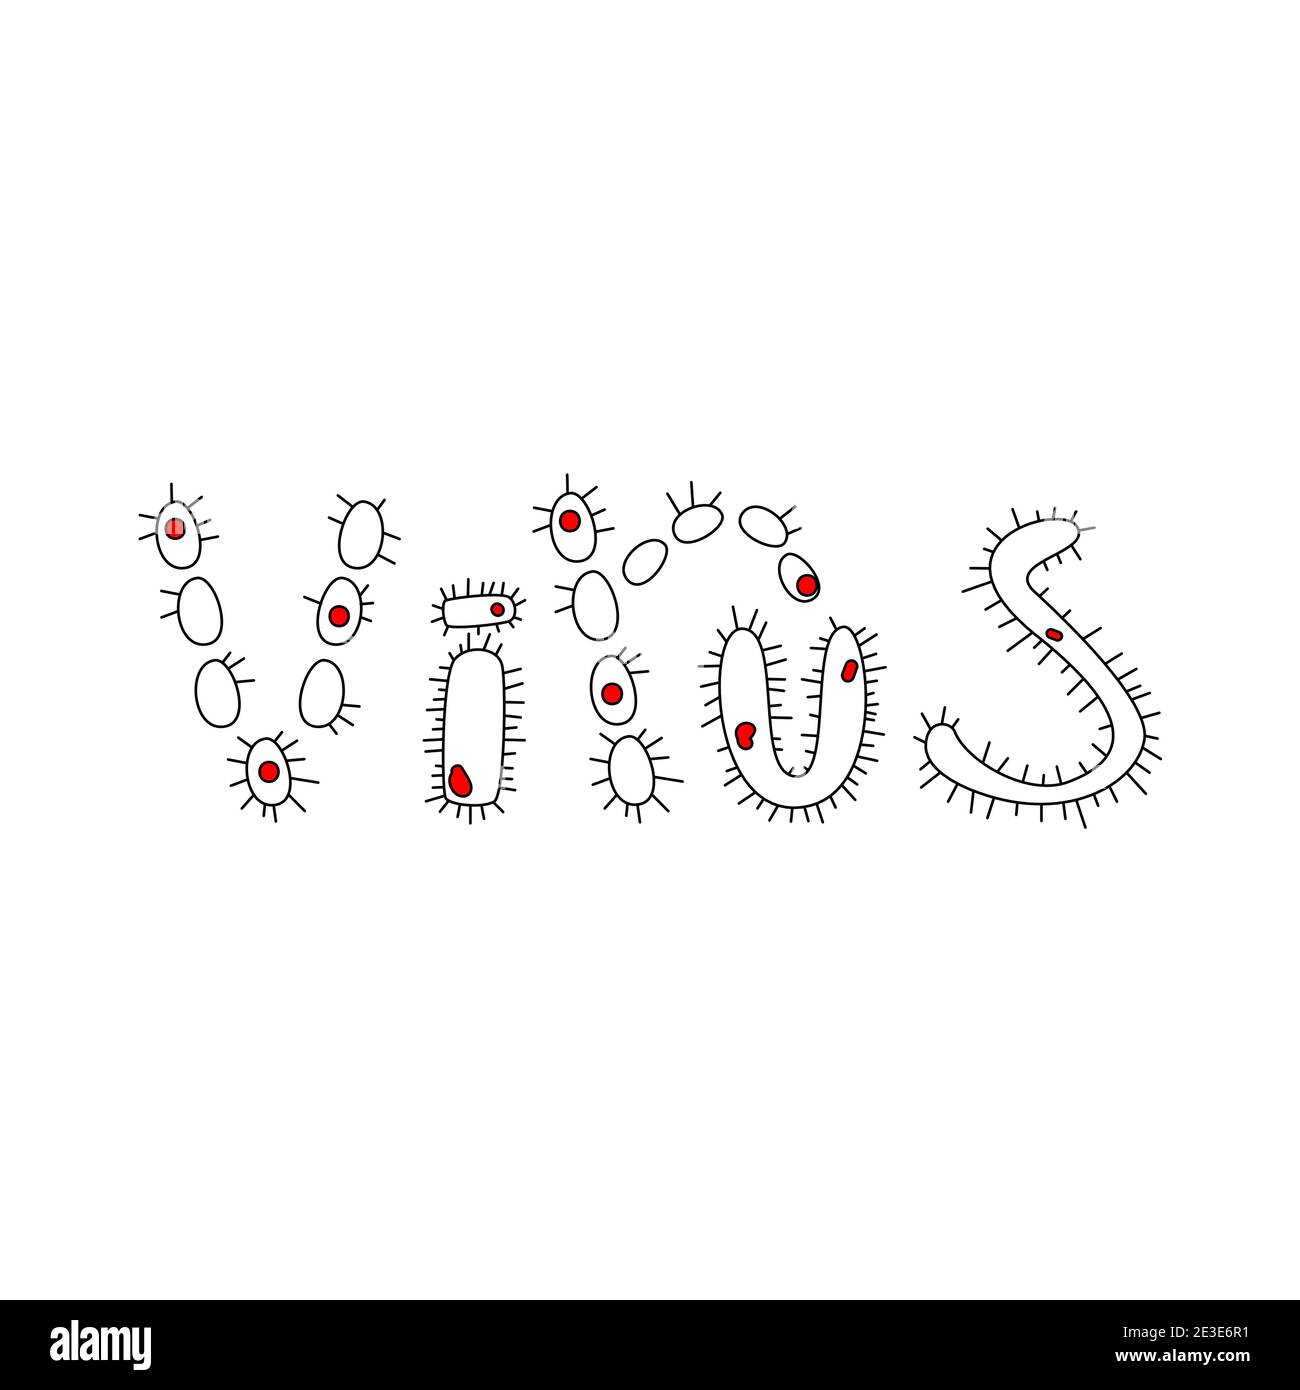 Black white word Virus in doodle style with stroke on white background. Stock Vector